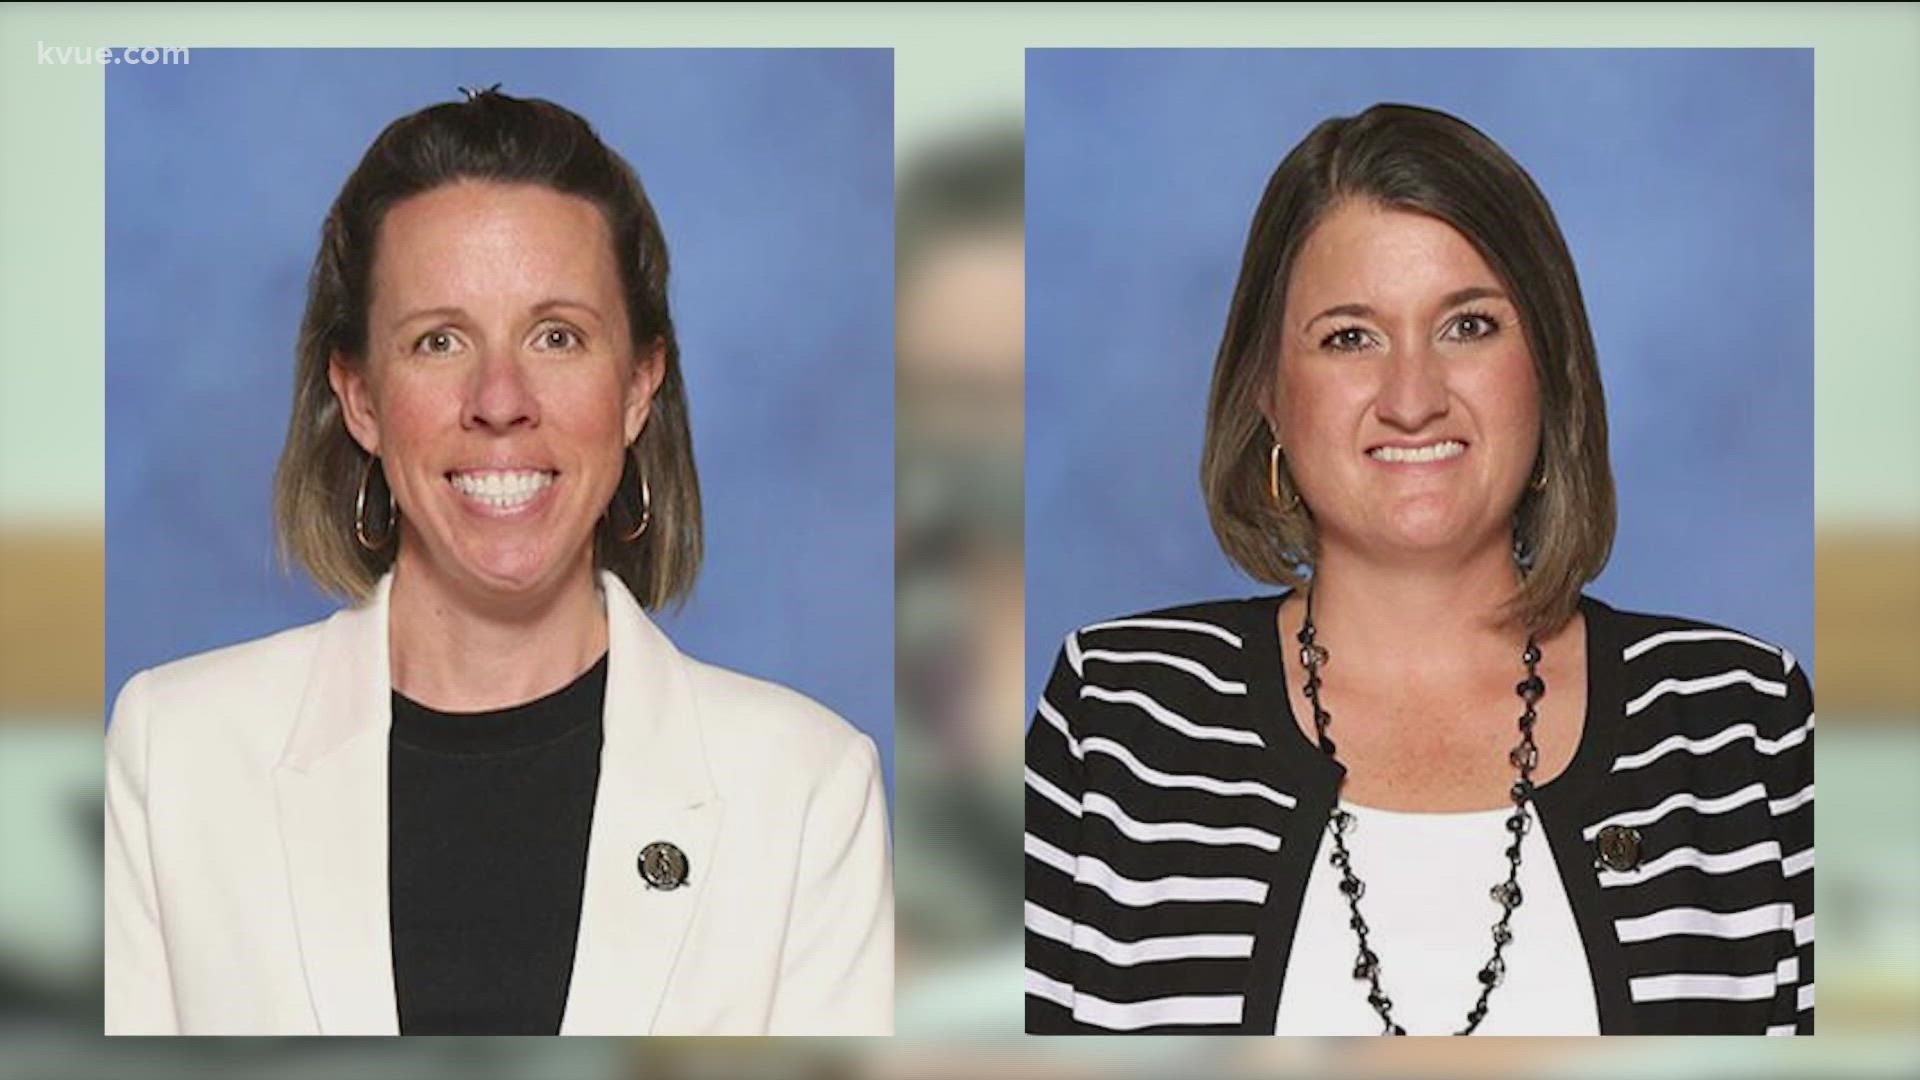 A judge has delayed a lawsuit over the proposed censure of two Round Rock ISD board members.